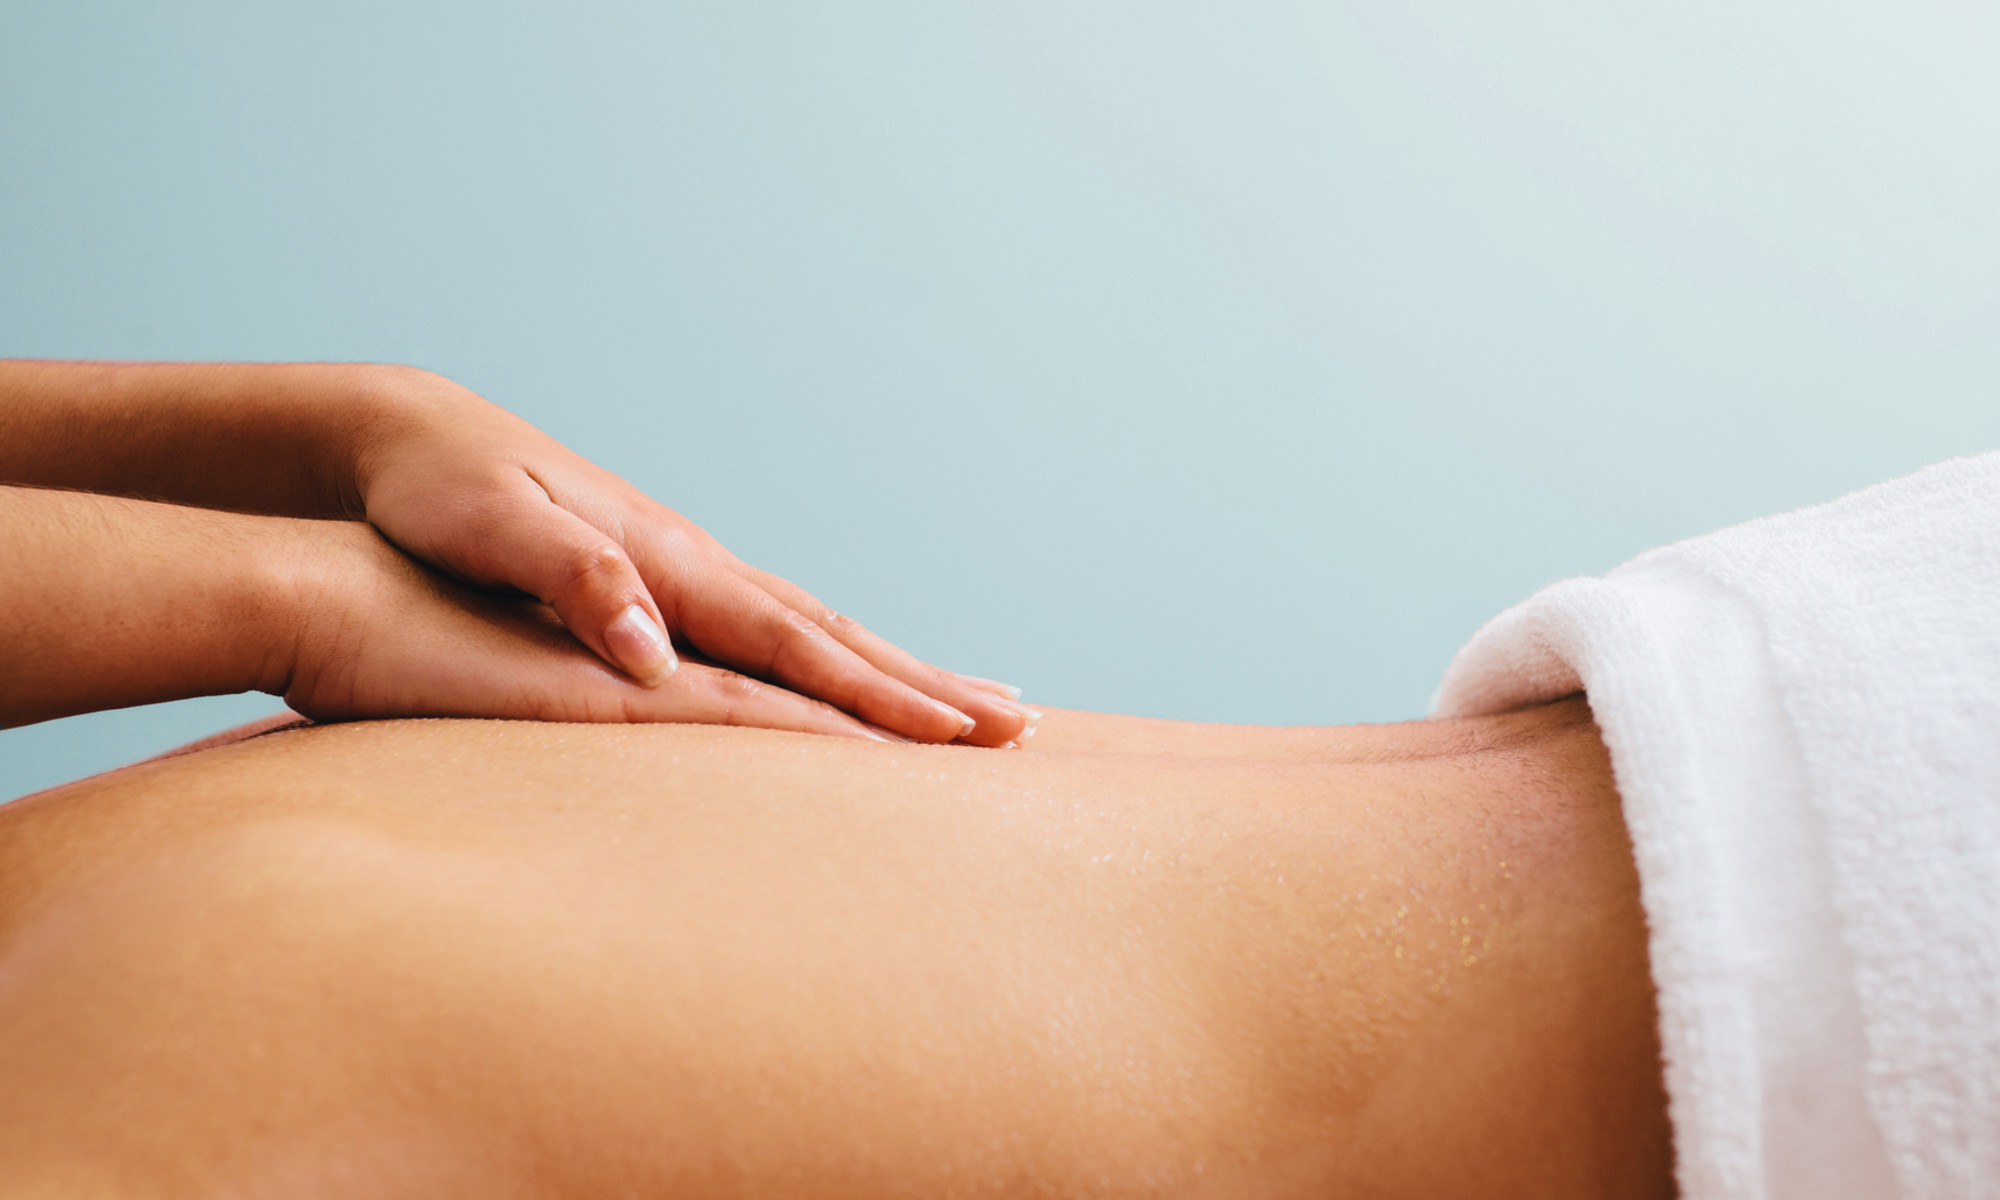 What Is Tantric Massage? 7 Ways To Try It At Home mindbodygreen image